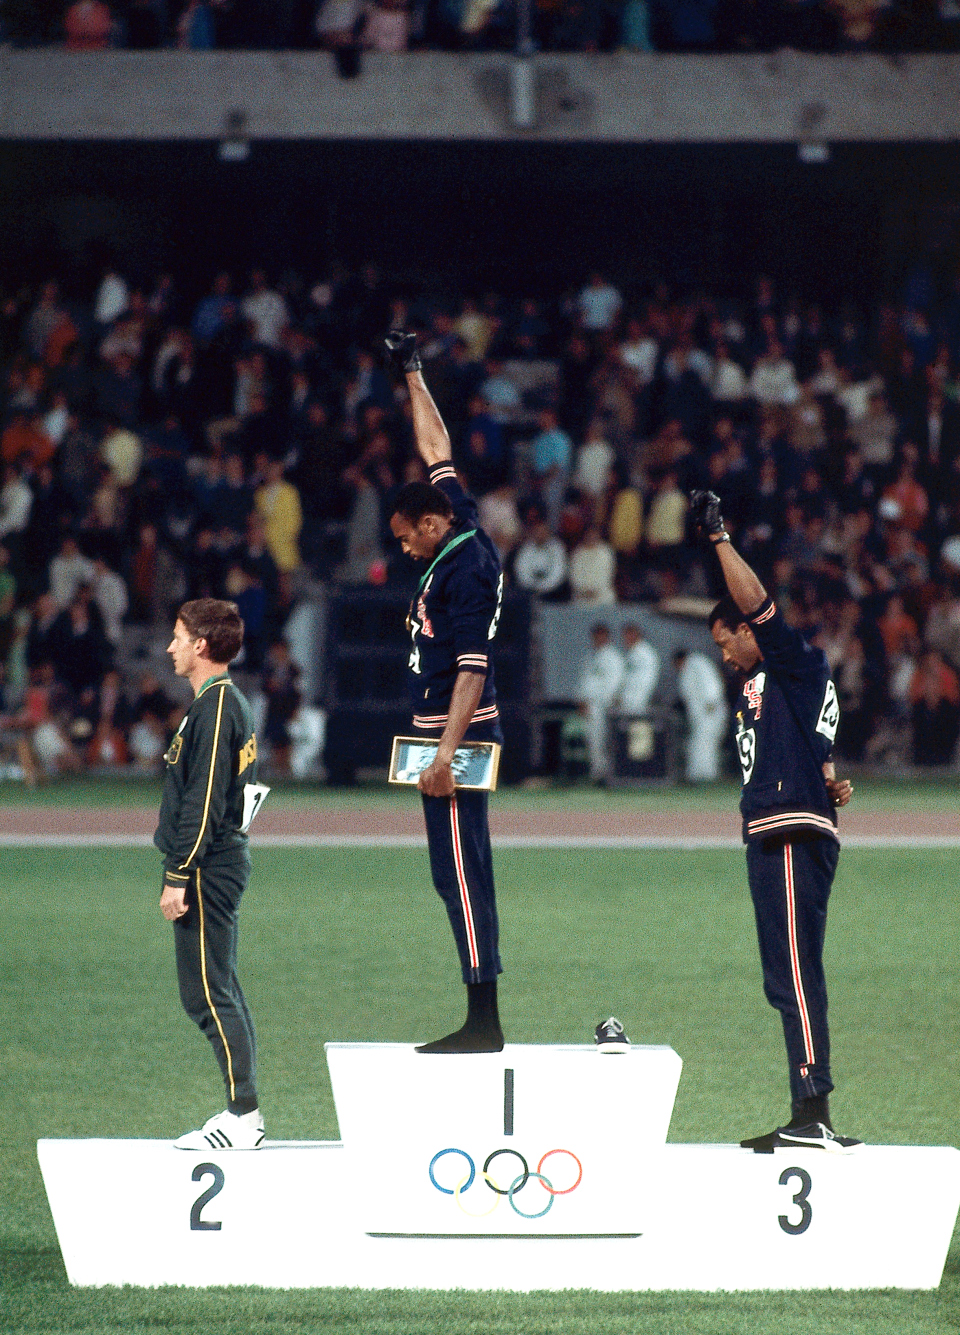 Black Power Salute on Olympic Medal Stand